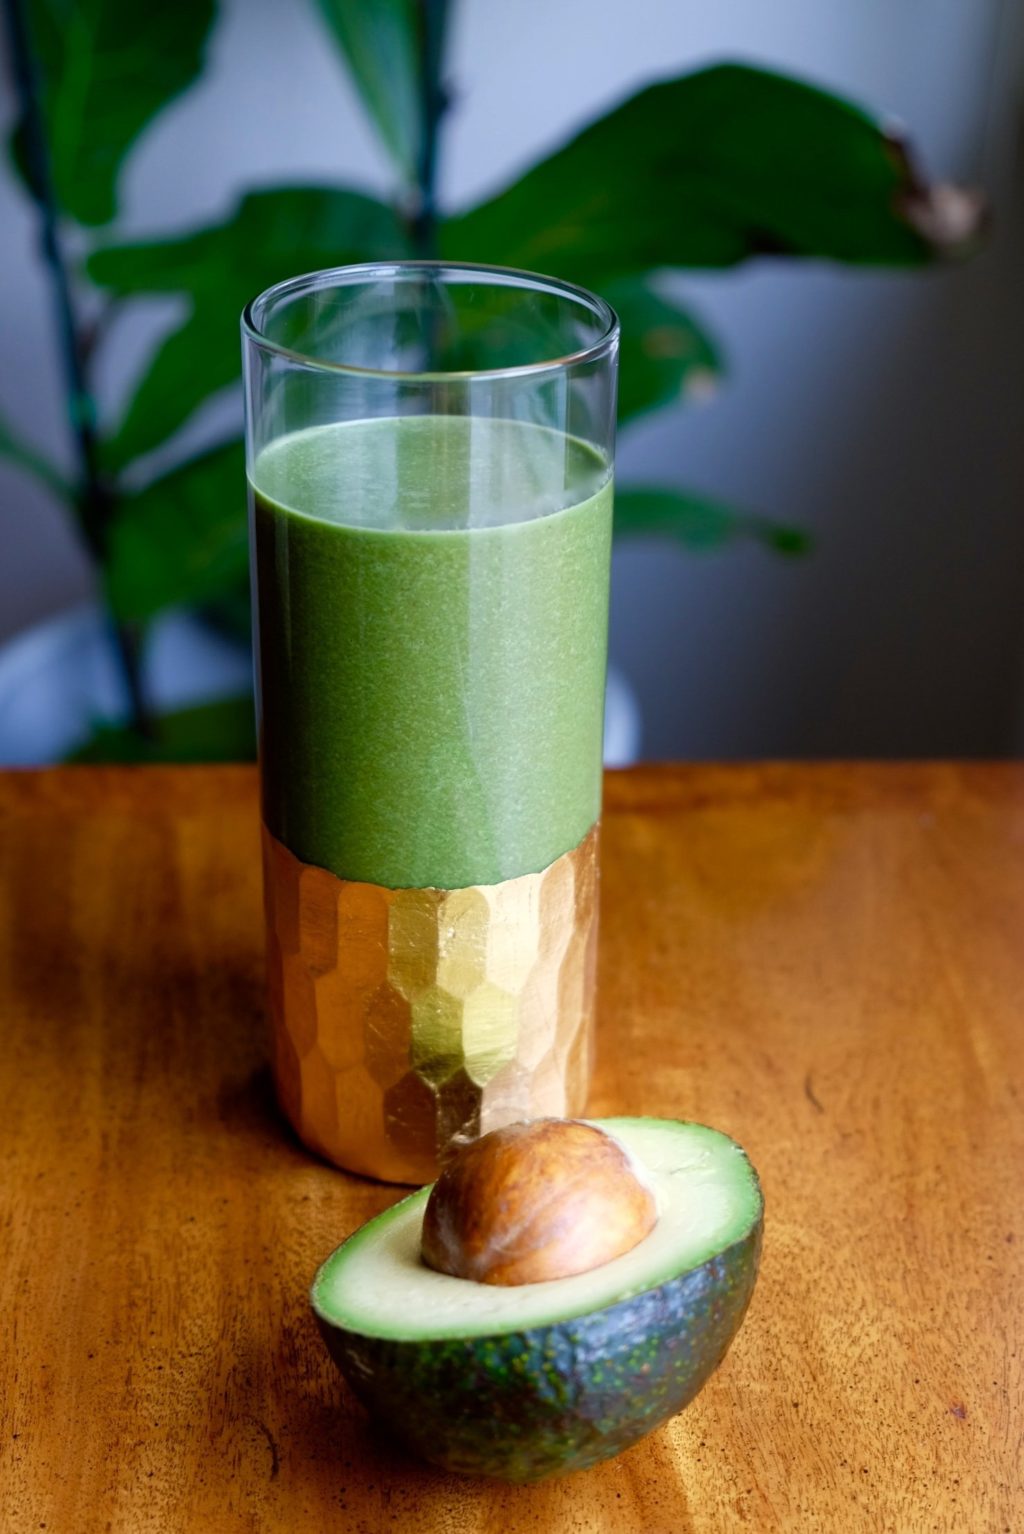 Learn how to prepare low glycemic smoothies for weight loss with these great suggestions. Discover the best green smoothie recipes. #natural #nobake #healthyrecipes #healthier #wellness #healthylifestyle #weightloss #highprotein